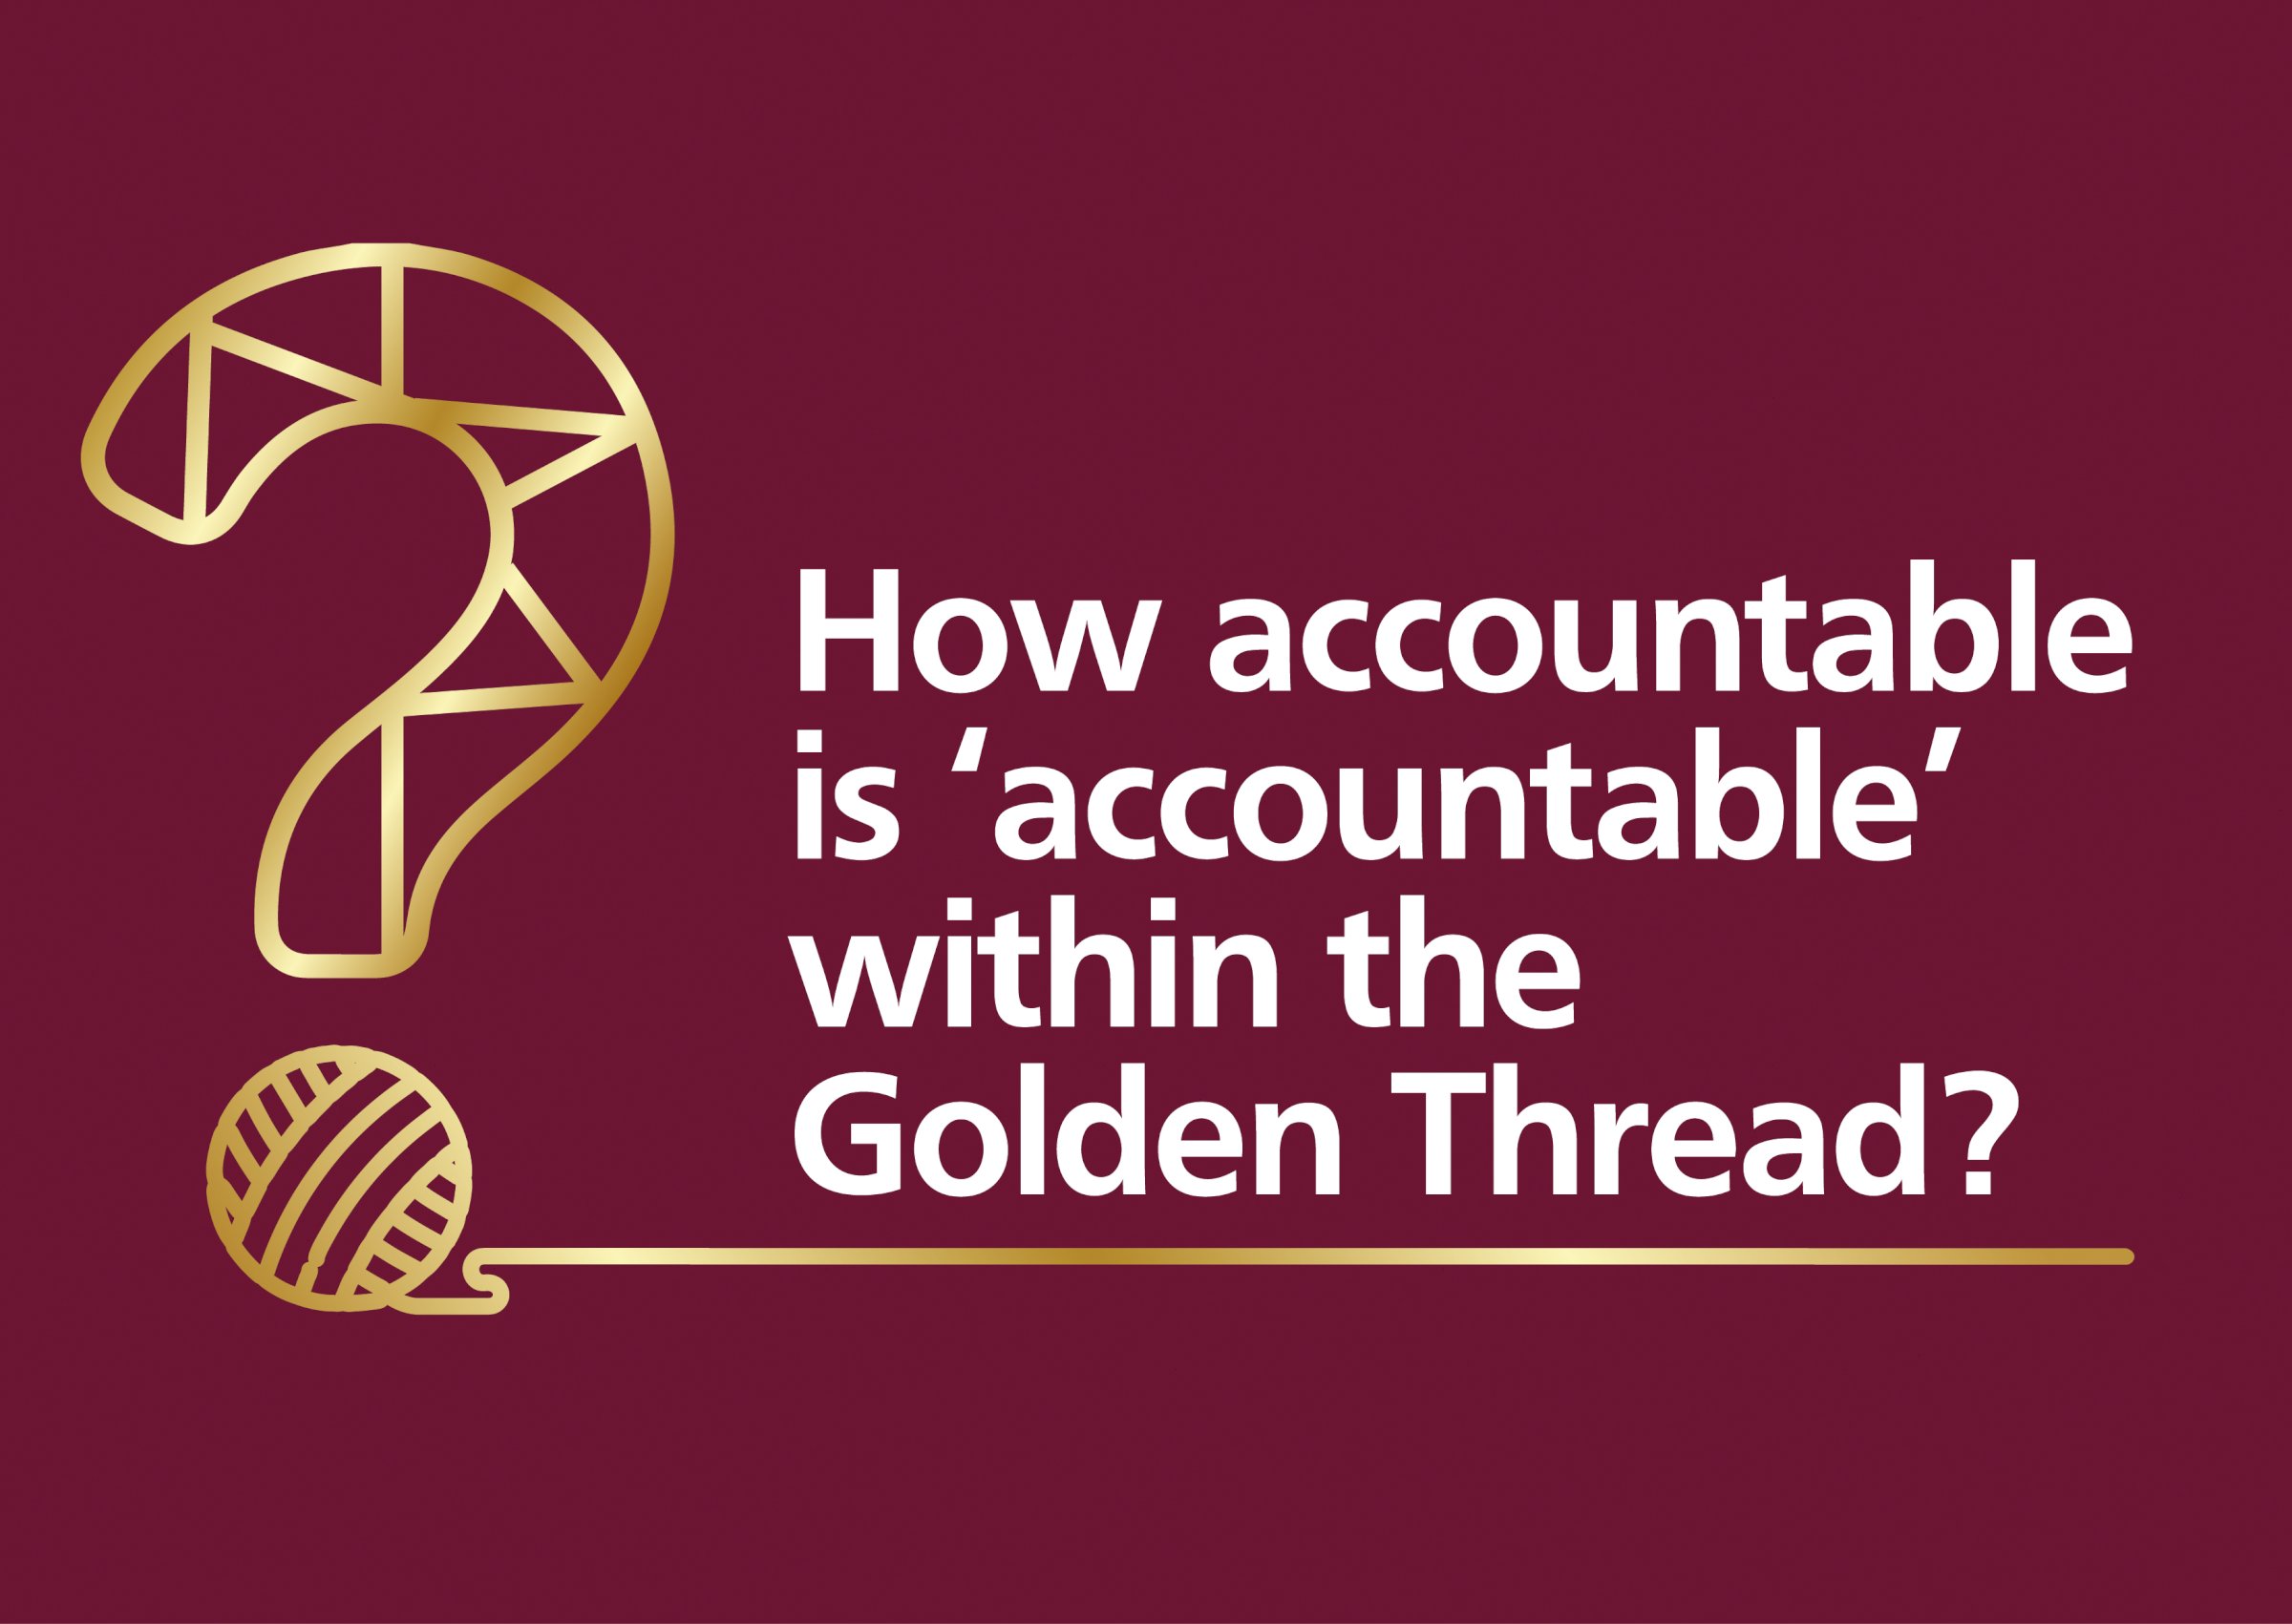 Webinar Series: How accountable is ‘Accountable’ within the Golden Thread?